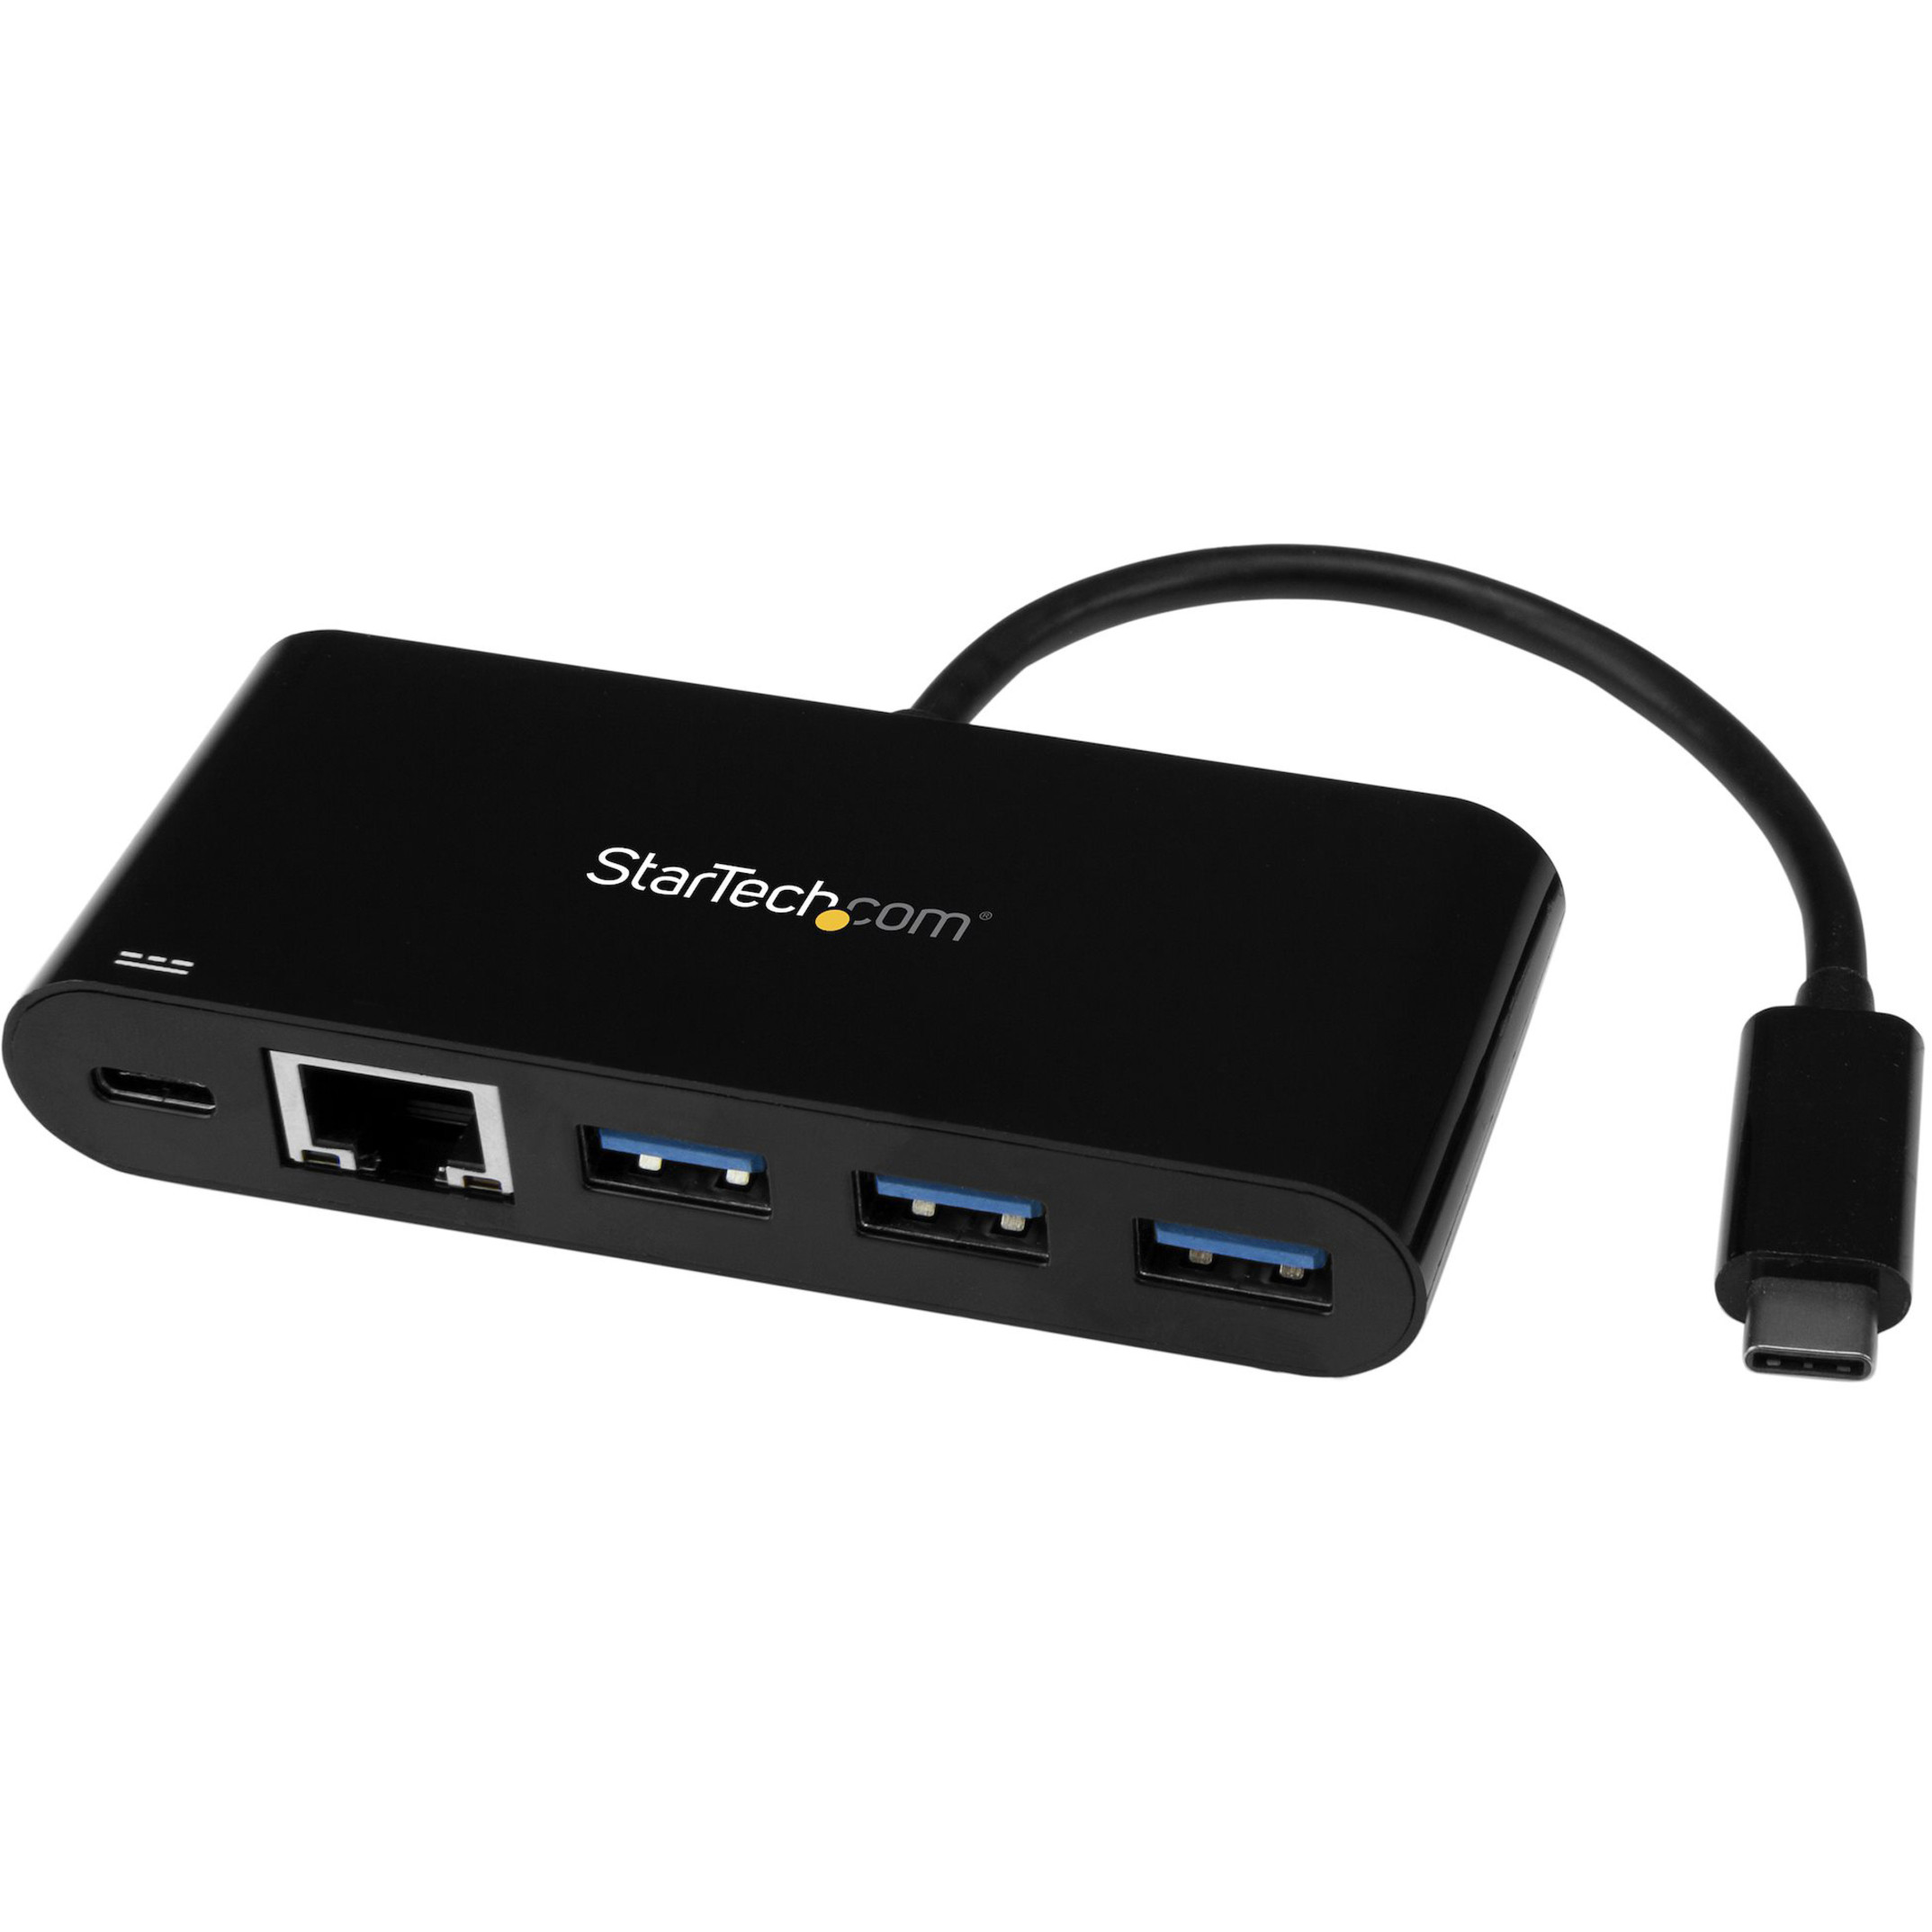 Startech .com USB-C to Ethernet Adapter with 3-Port USB 3.0 Hub and Power DeliveryUSB-C GbE Network Adapter + USB Hub w/ 3 USB-A PortsC… US1GC303APD